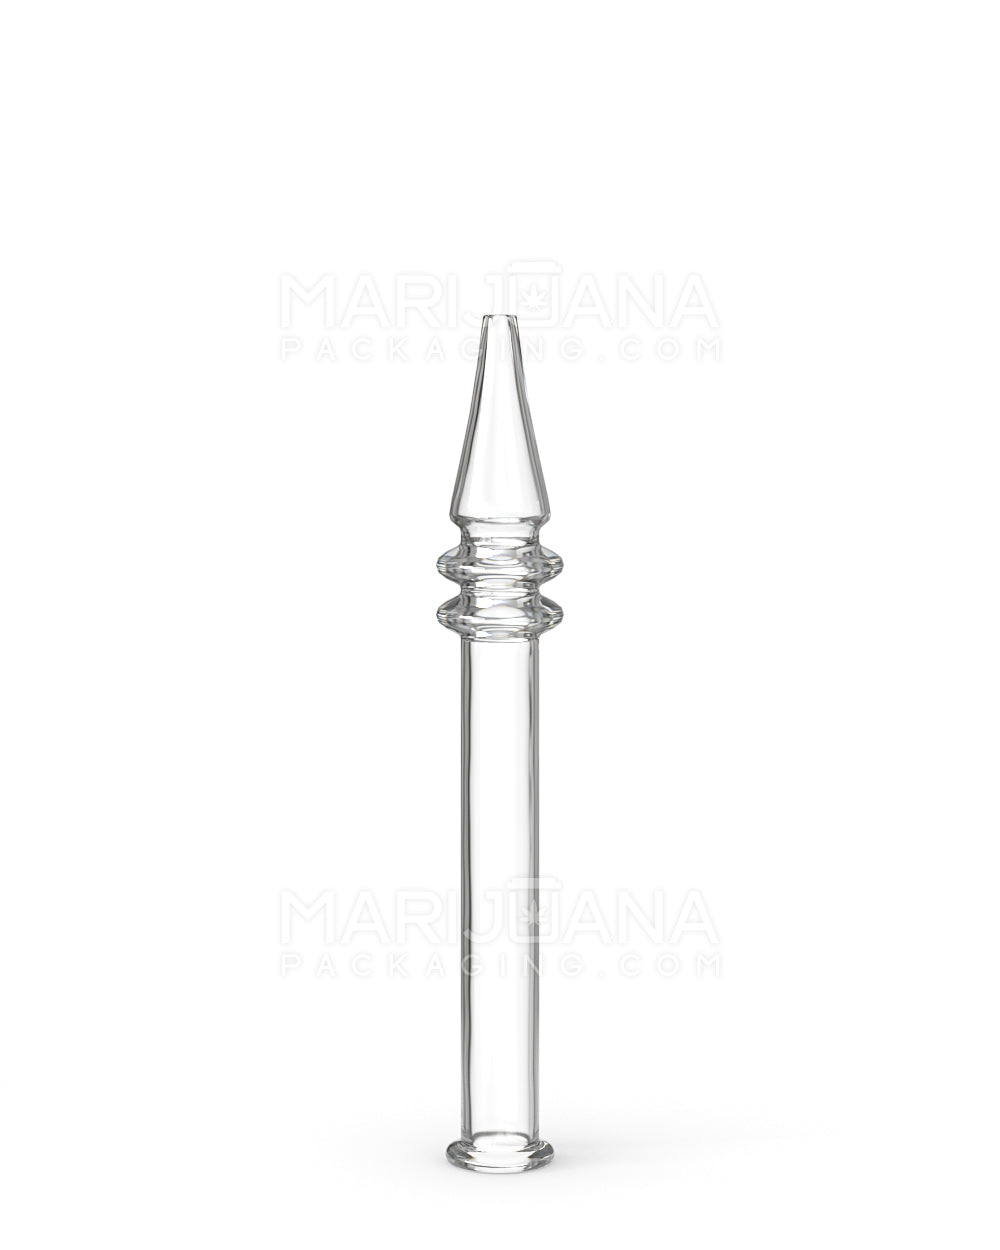 Glass Nectar Collector, Dab Straw